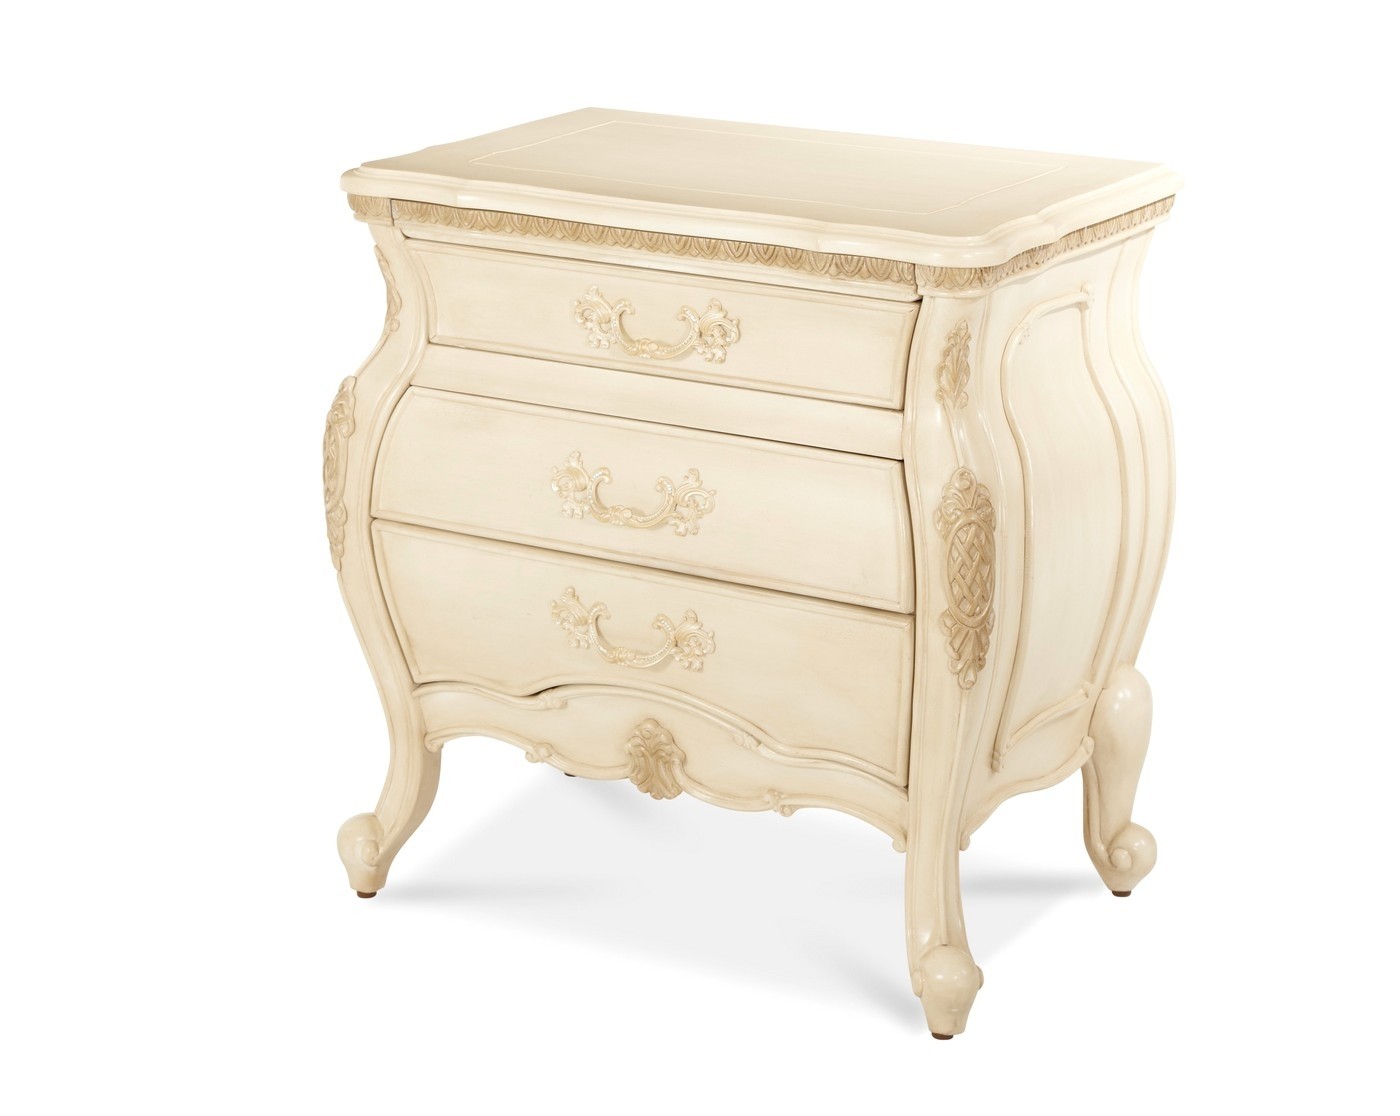 Michael amini lavelle french country blanc finish